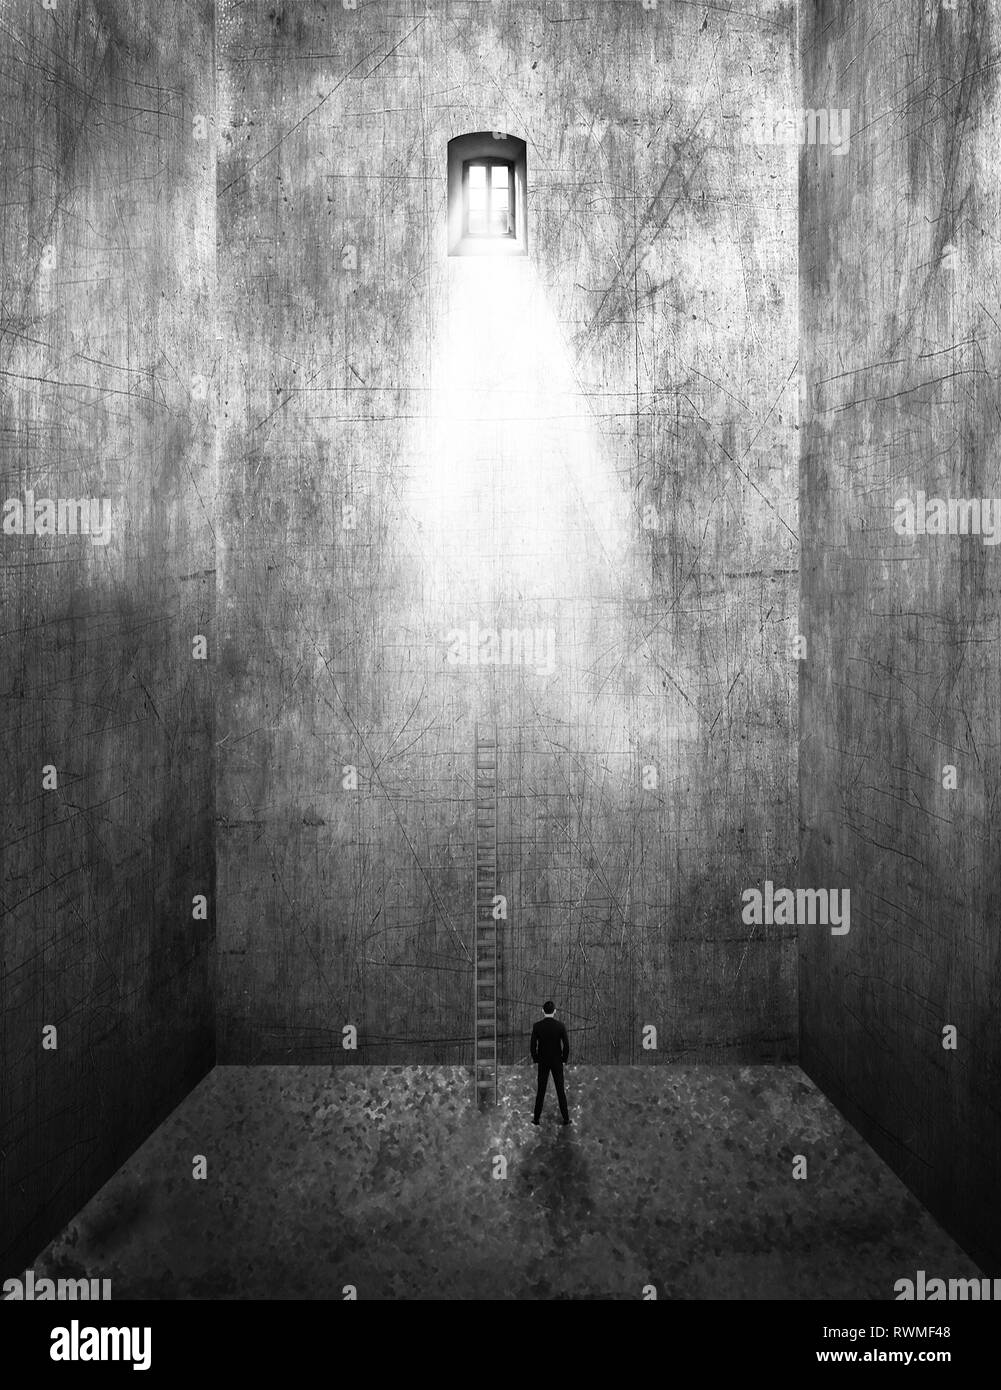 Image of a man standing in an empty room with tall walls and a ladder leading up to the sunlight streaming from a window far above, composite image Stock Photo